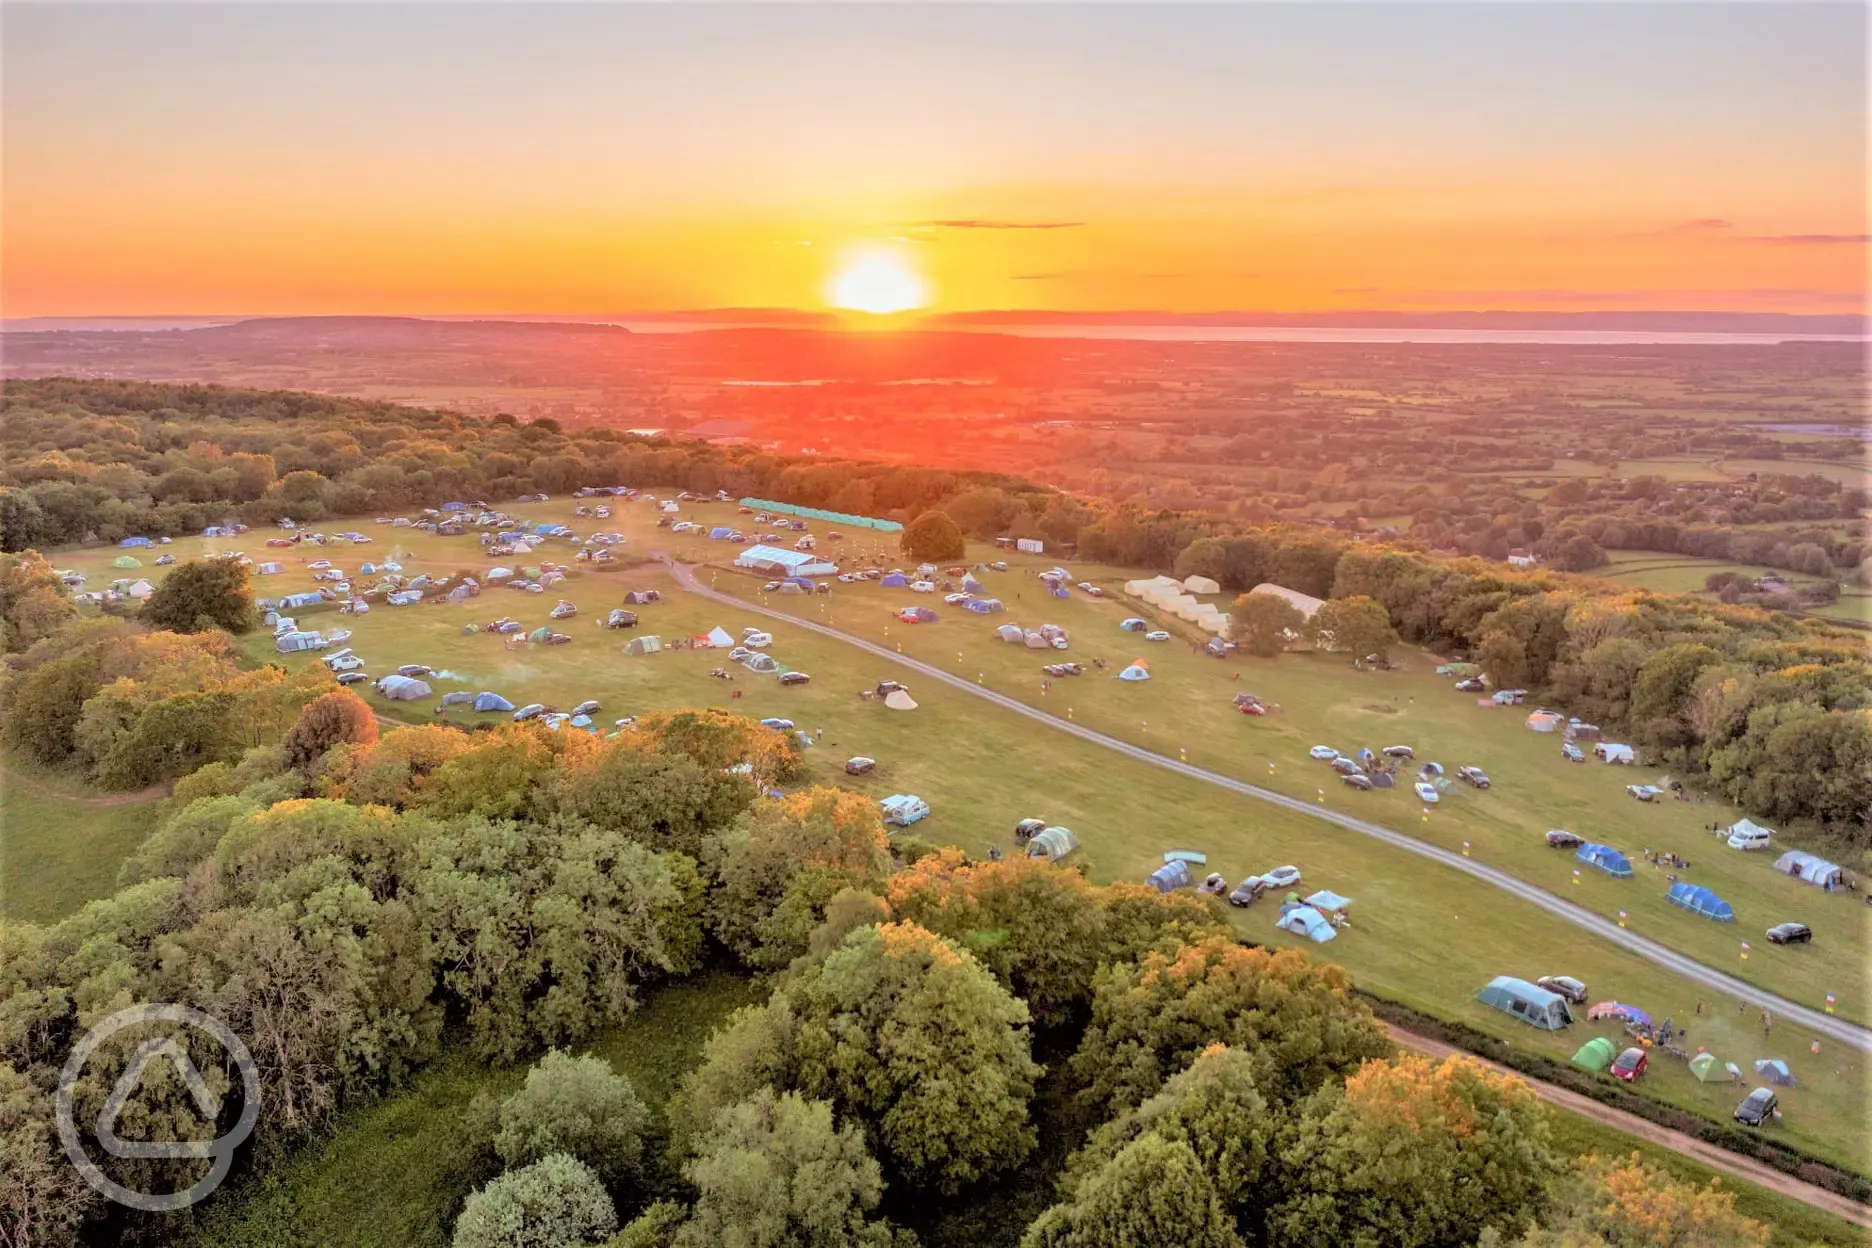 Aerial of the campsite at sunset